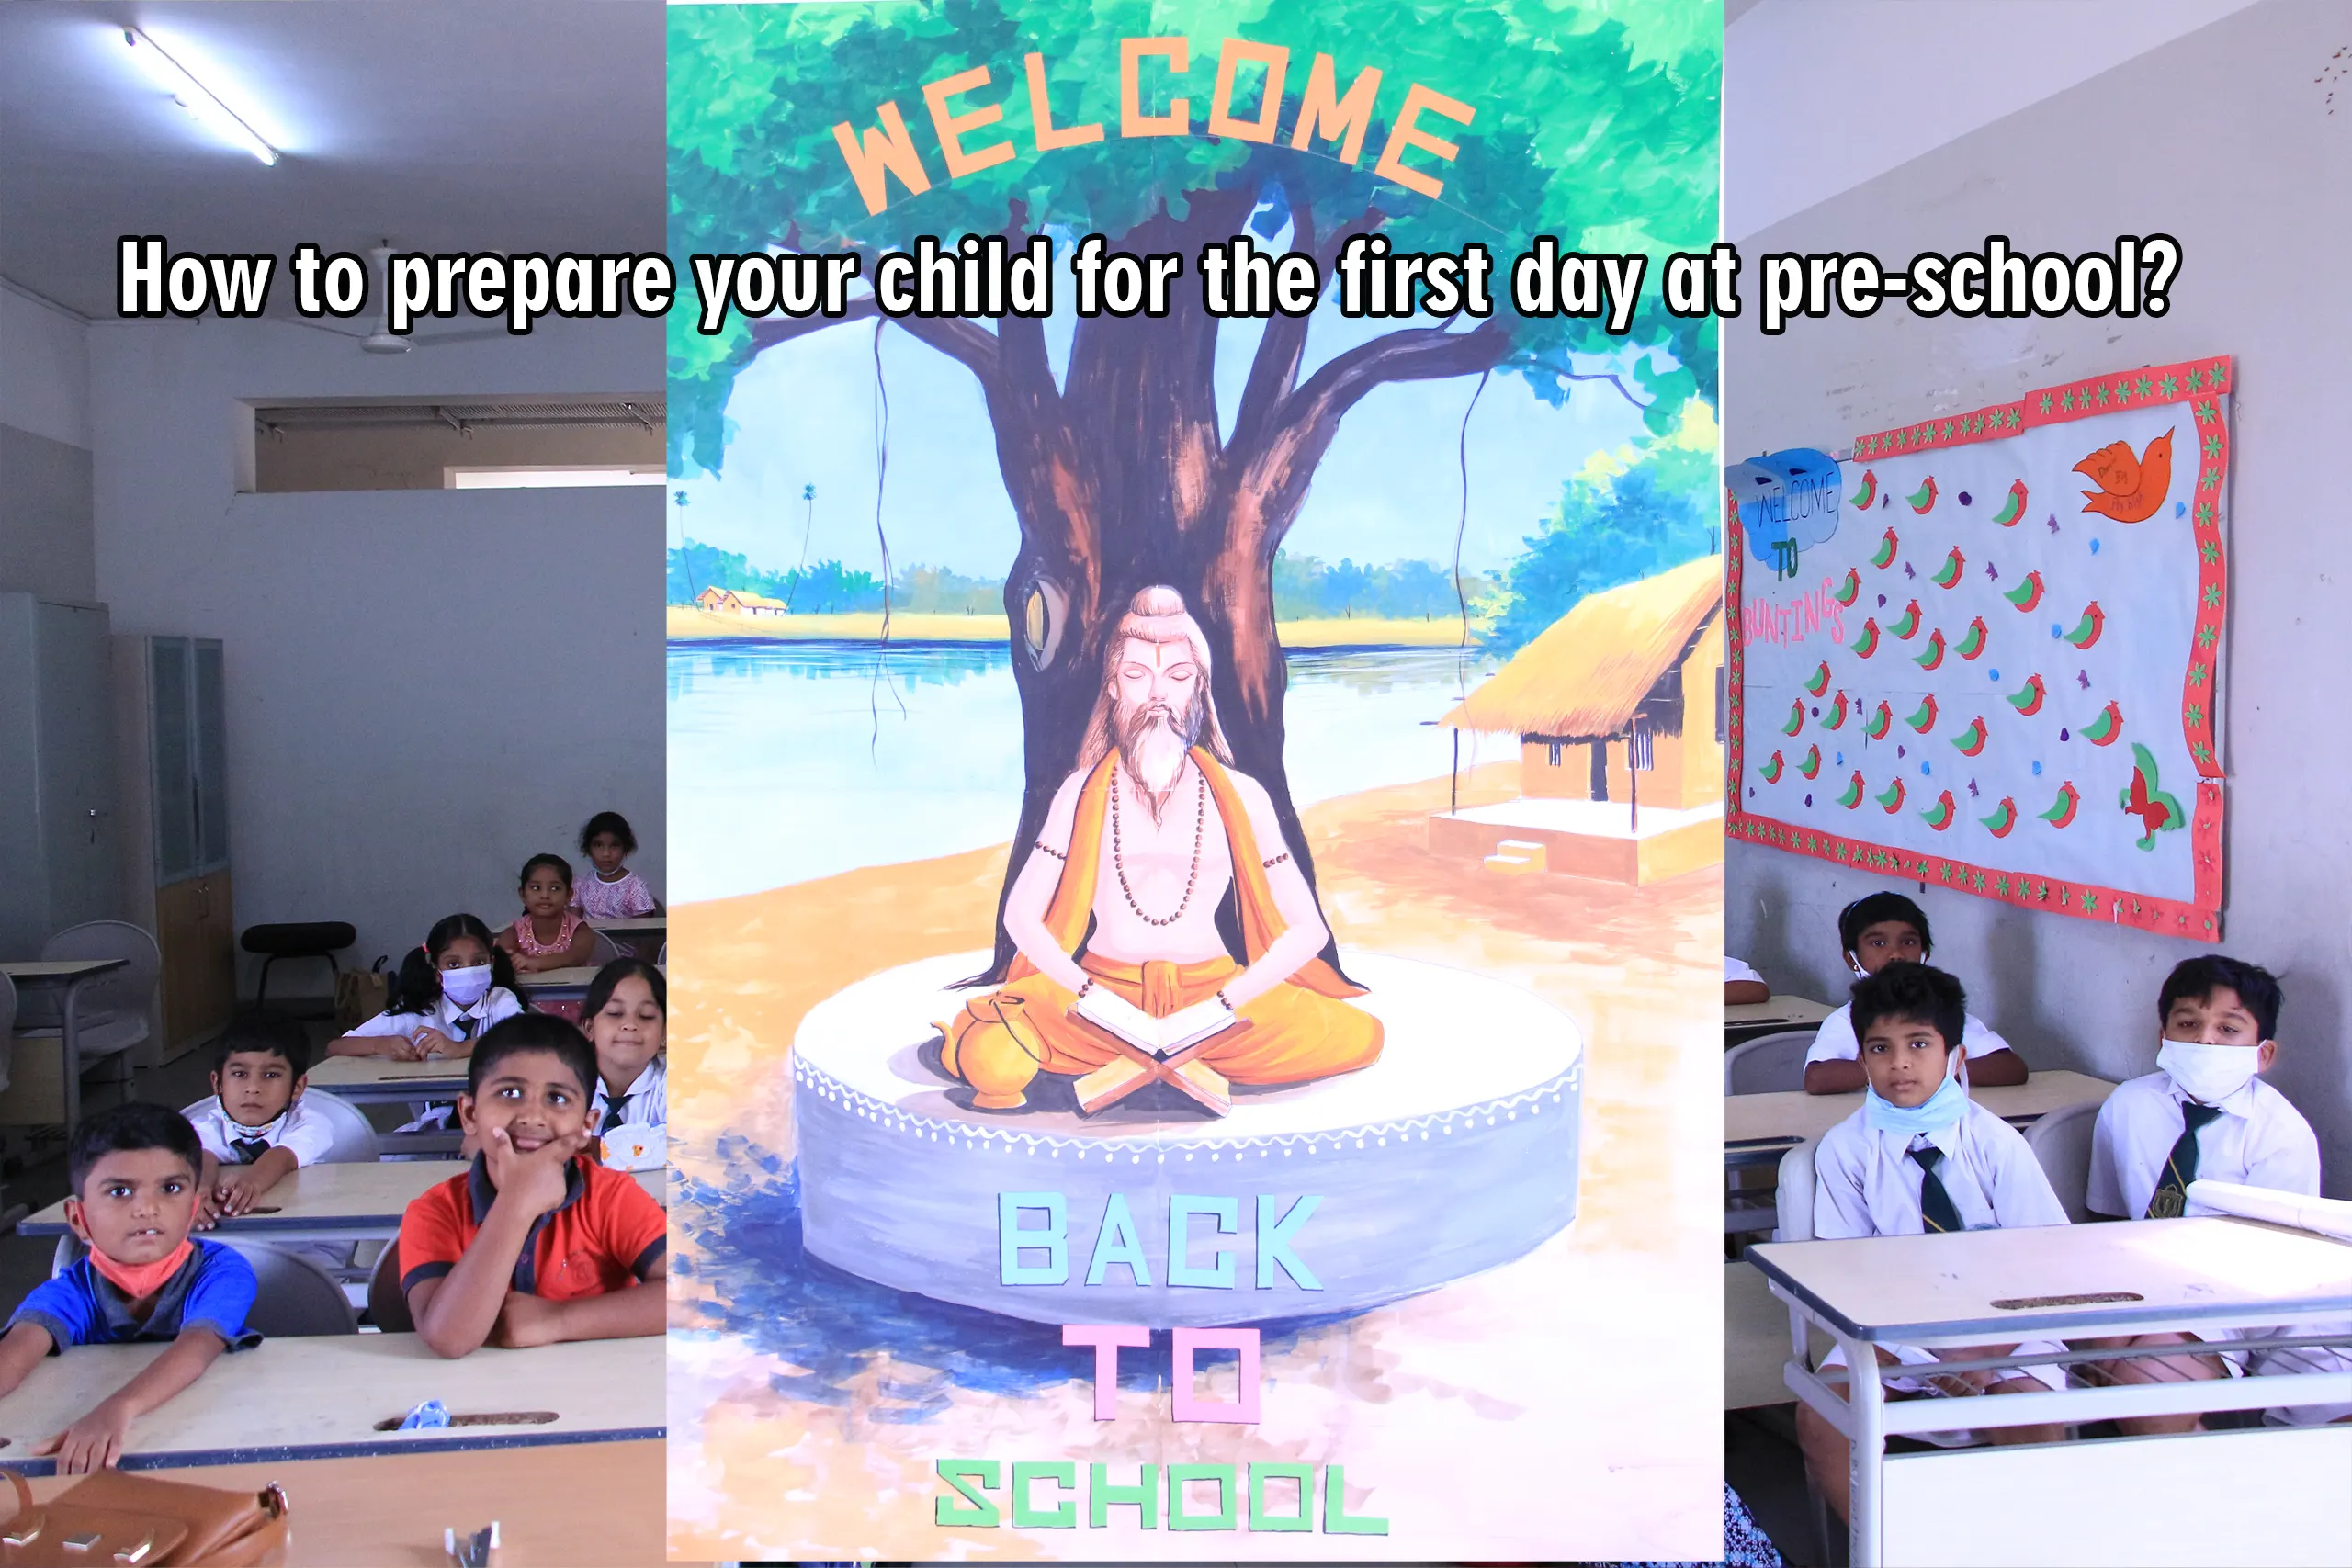 Prepare your child for the first day at pre-school.